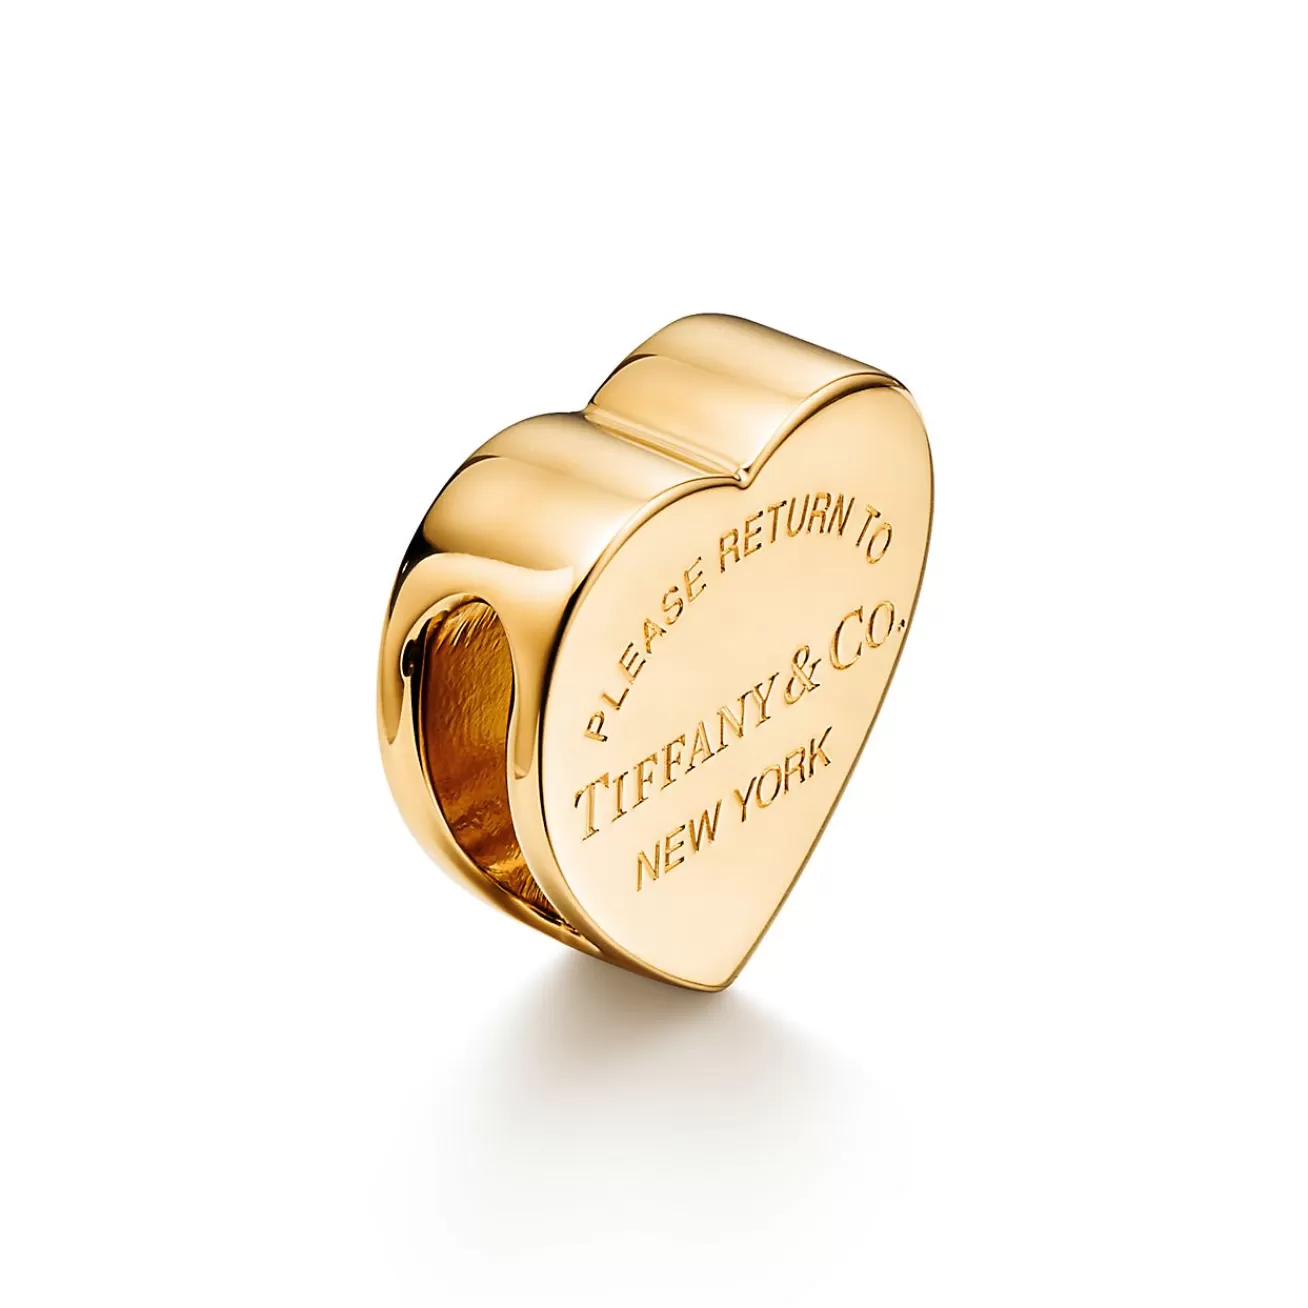 Tiffany & Co. Return to Tiffany® Scarf Ring in Yellow Gold-plated Metal | ^Women Women's Accessories